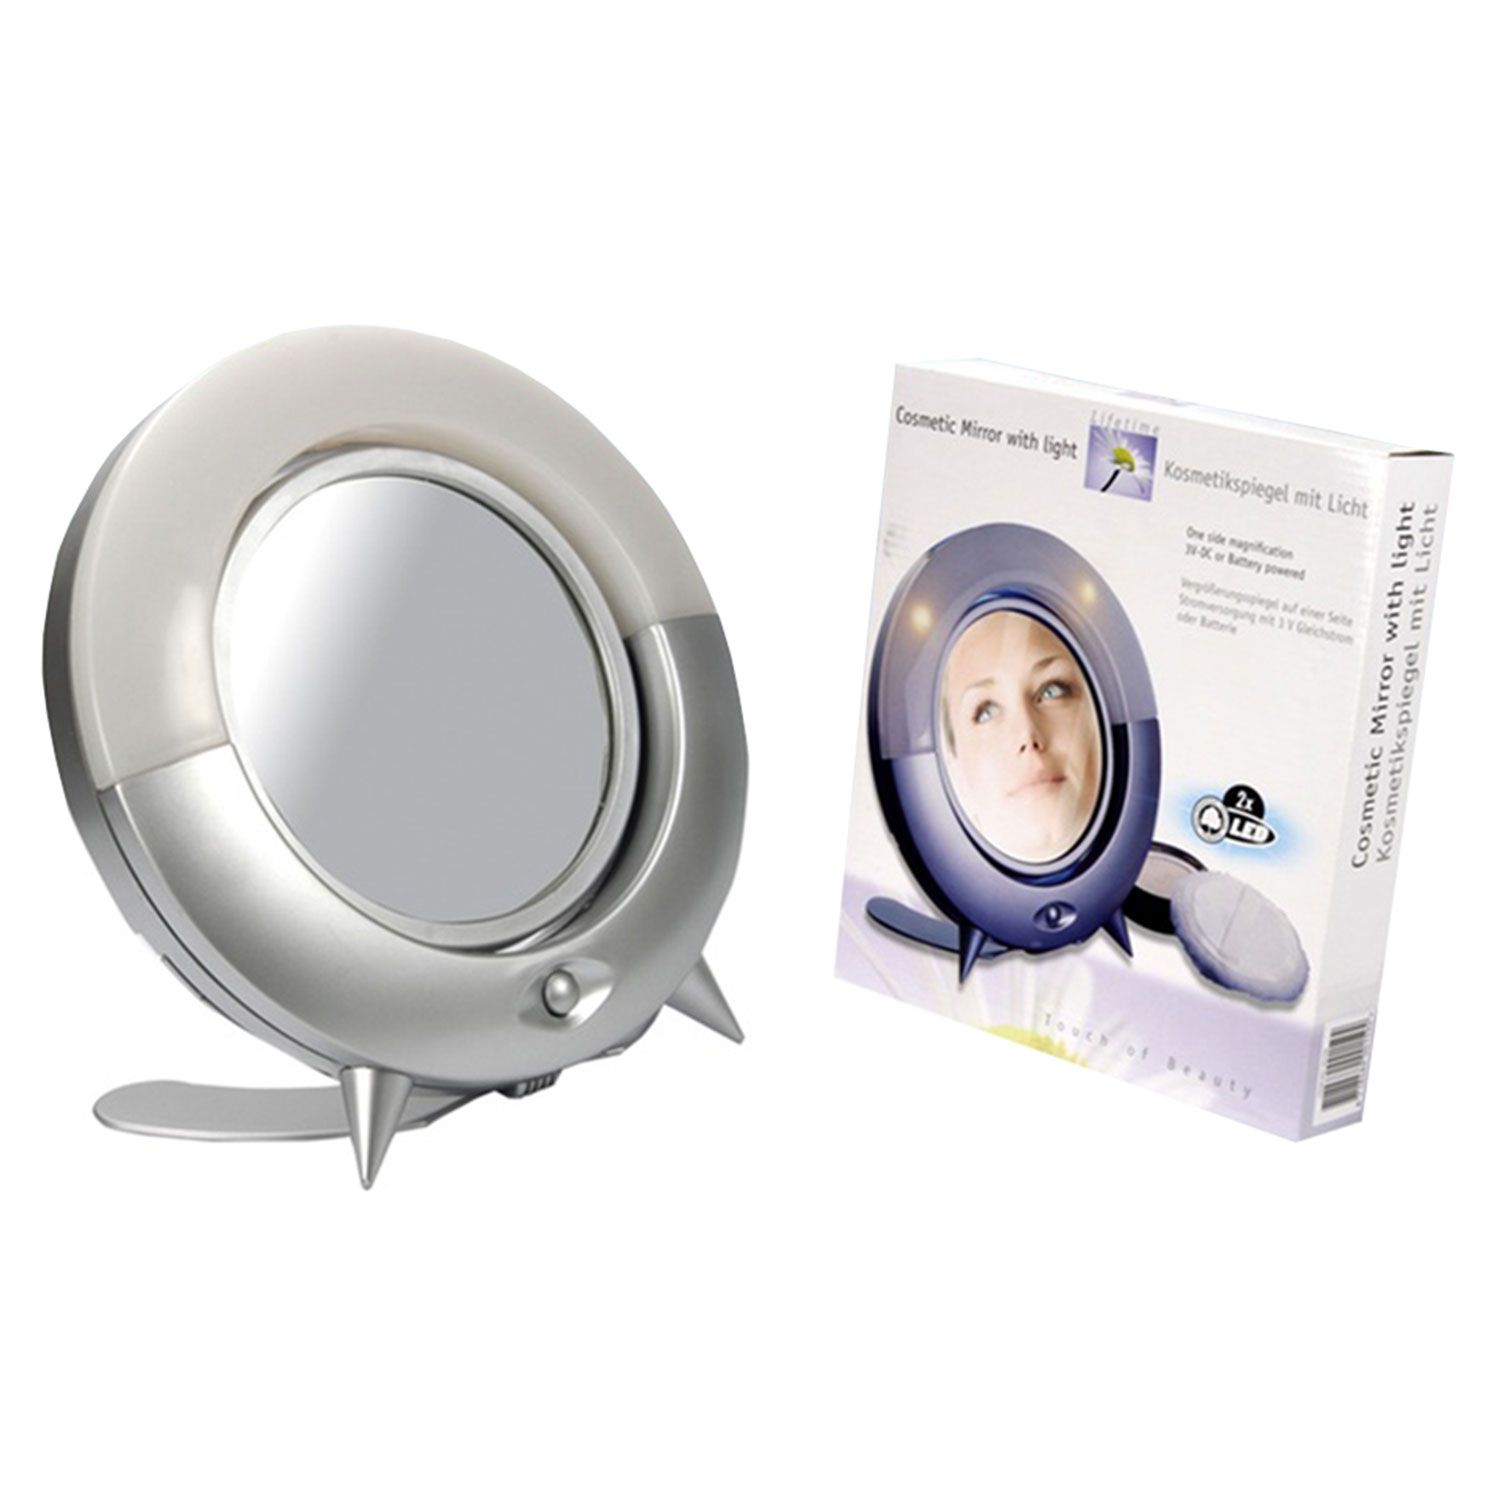 Envie Cosmetic Mirror with Light.  Do you suffer from looking in the mirror, but not being able to see everything well enough due to shadows, for example?  Then the Cosmetic Mirror with light is definitely something for you. Because the Cosmetic Mirror With Light is equipped with lights, you always have enough light to look in the mirror, which is super handy for doing your make-up, for example.  Despite the light, you may still not be able to see some spots well enough.  There the Cosmetic Mirror also has a handy solution, namely the one that is enlarged. You can use the mirror standing or hanging.  The mirror works via a 3V-DC adapter or 2 R14 batteries. The batteries are not included.

Key Features:
Plastic frame rotating mirror 
2x LED lamp 
One magnifying side 
Can be used standing or hanging 
Operates on 3V-DC adapter or 2 R14 batteries (not included)
Diameter of 22cm